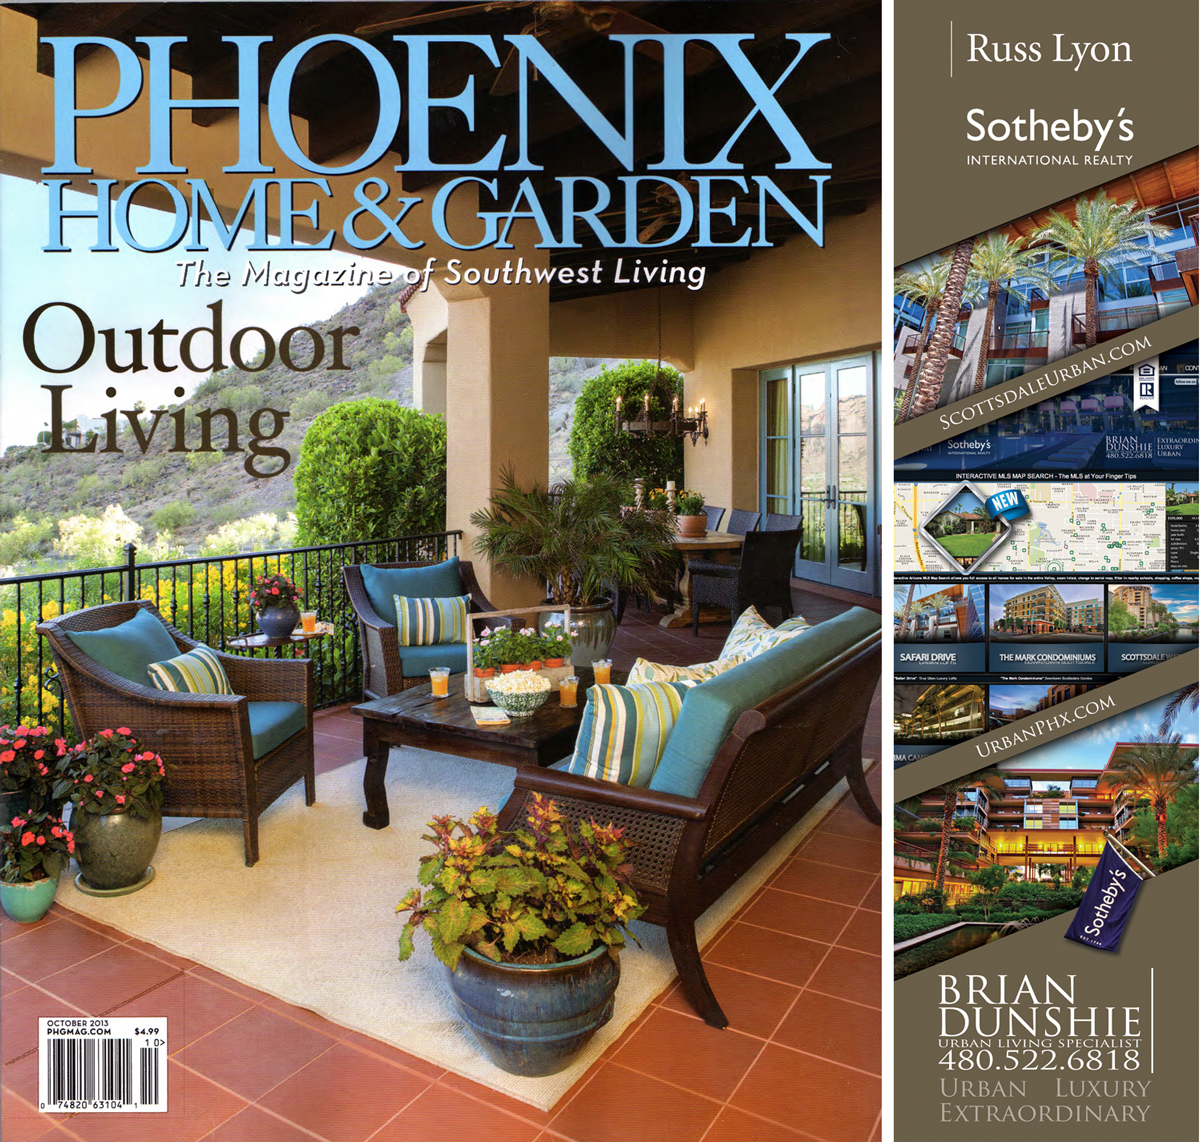 pheonix home & garden magazine quotes real estate agent Brian Dunshie re downtown urban living